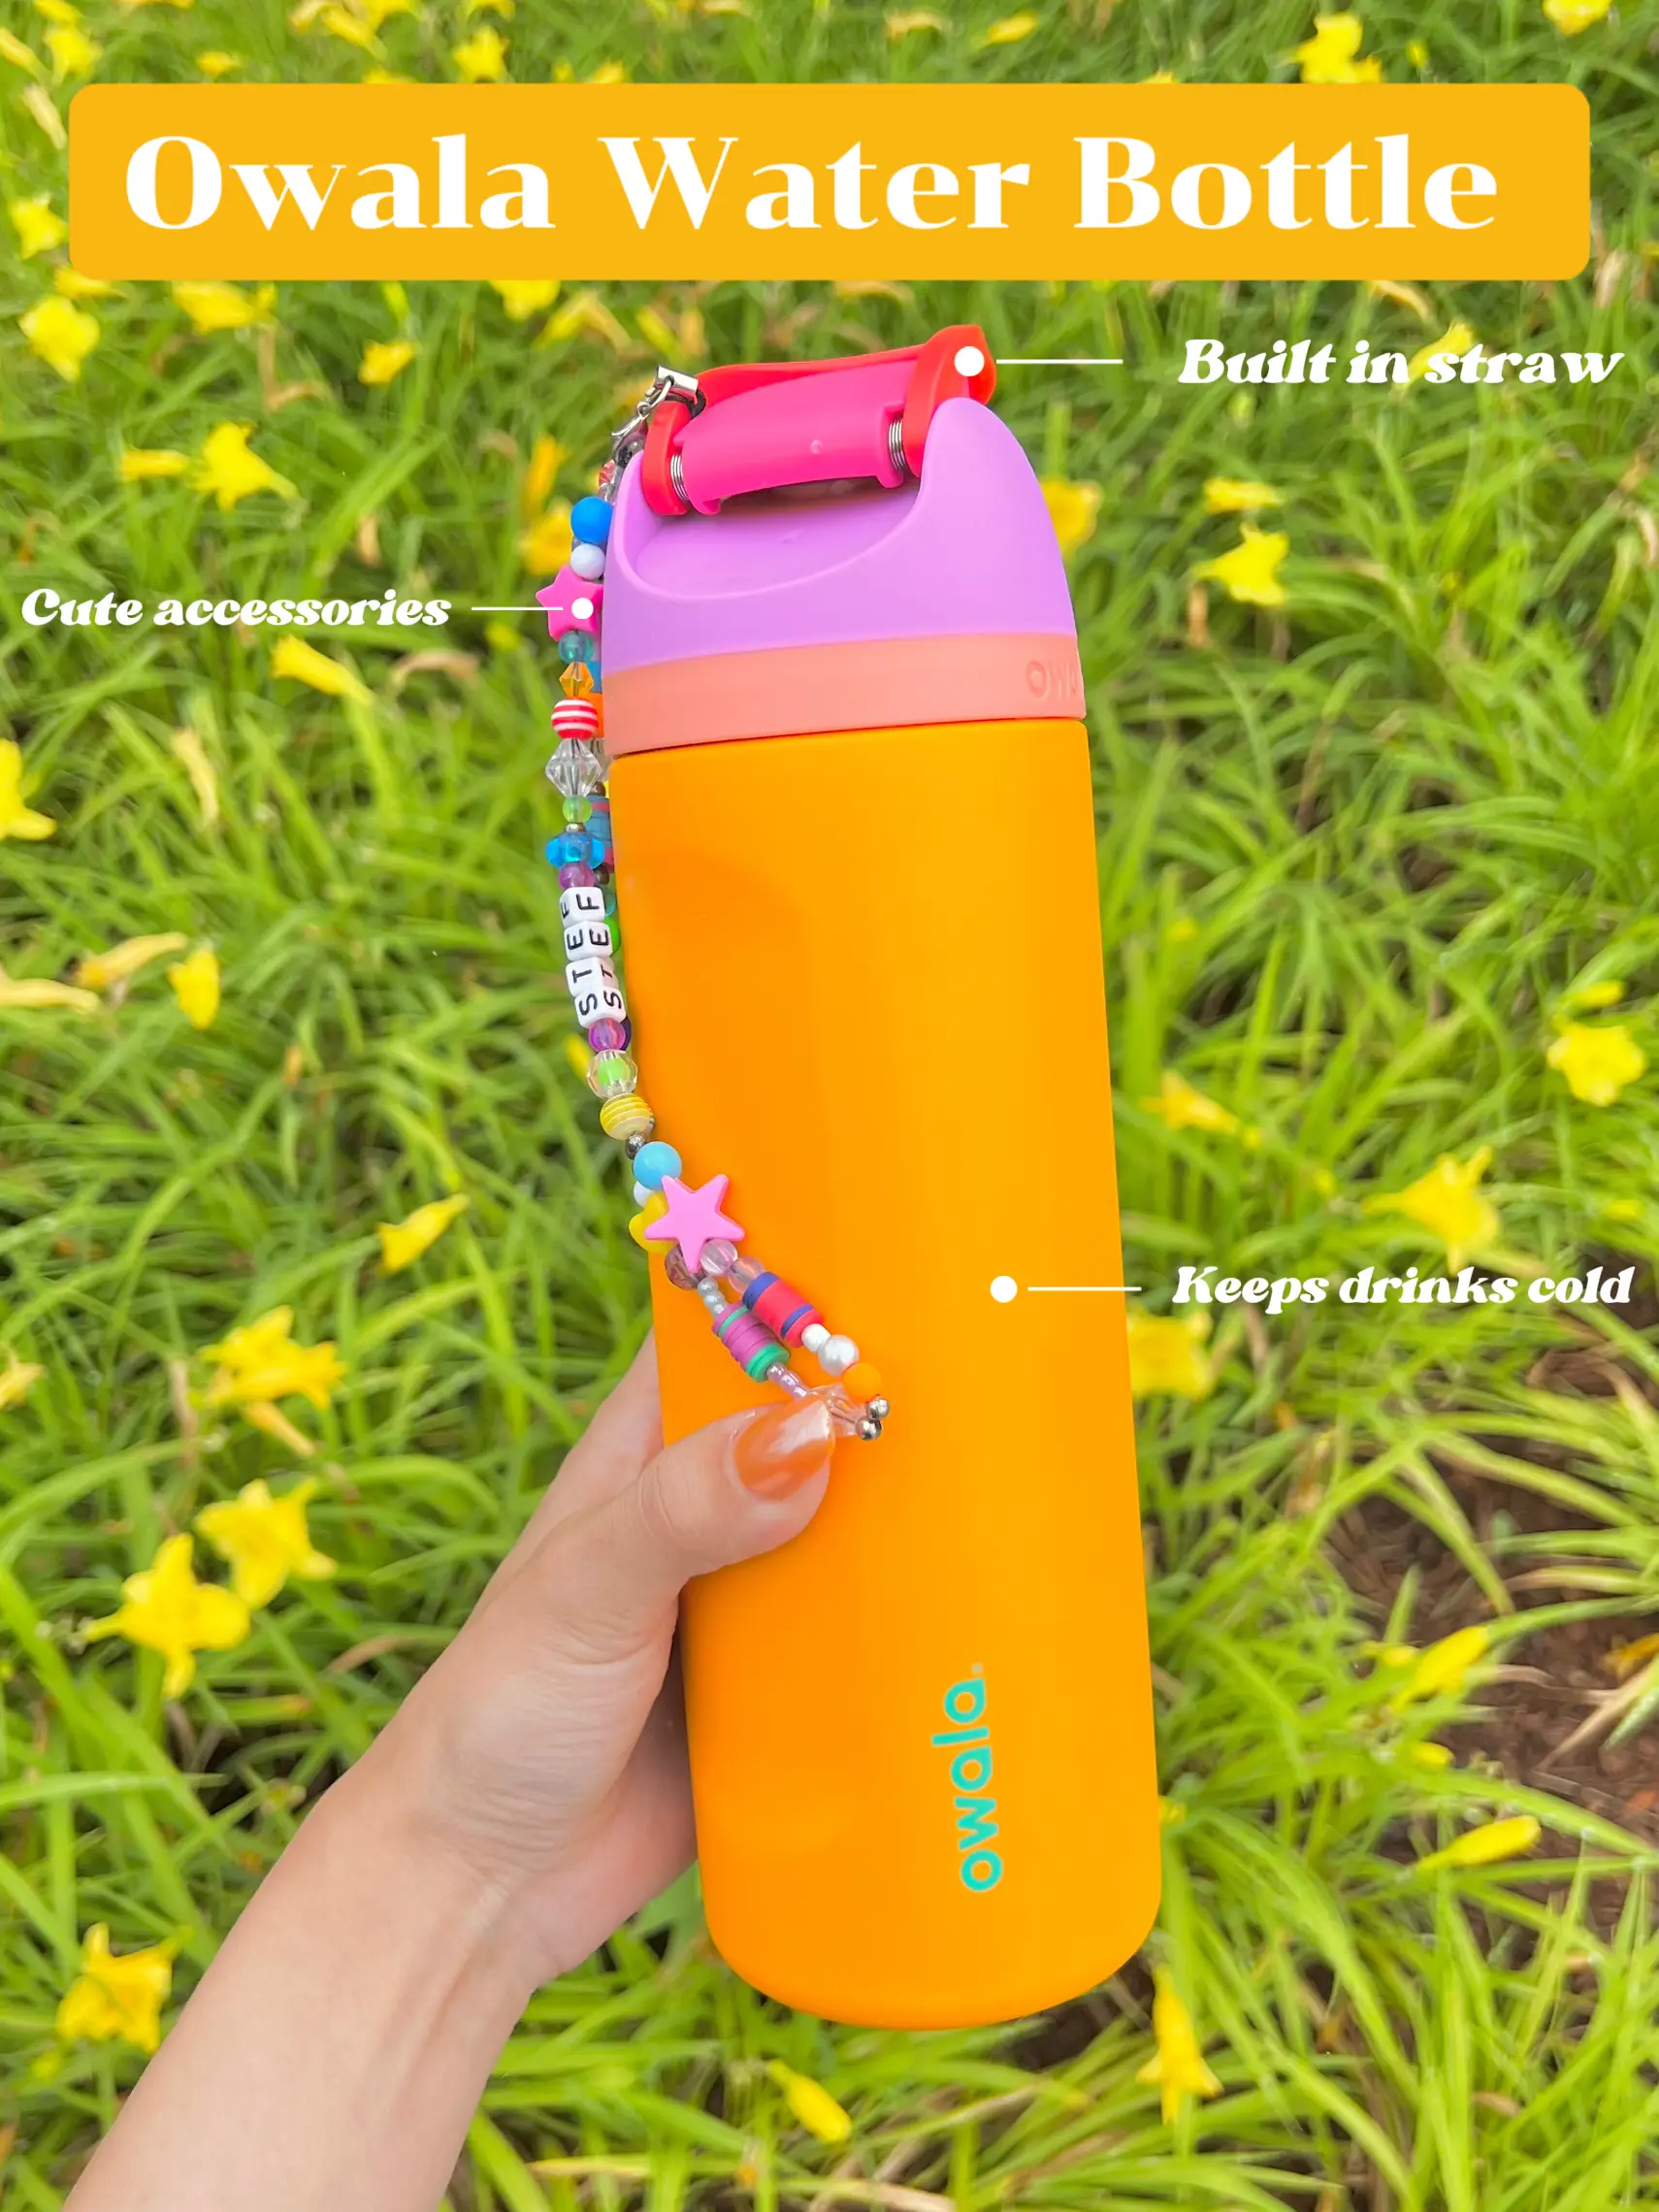 Owala Water Bottle 🍊 ✨  Gallery posted by S ₊✩‧₊˚౨ৎ